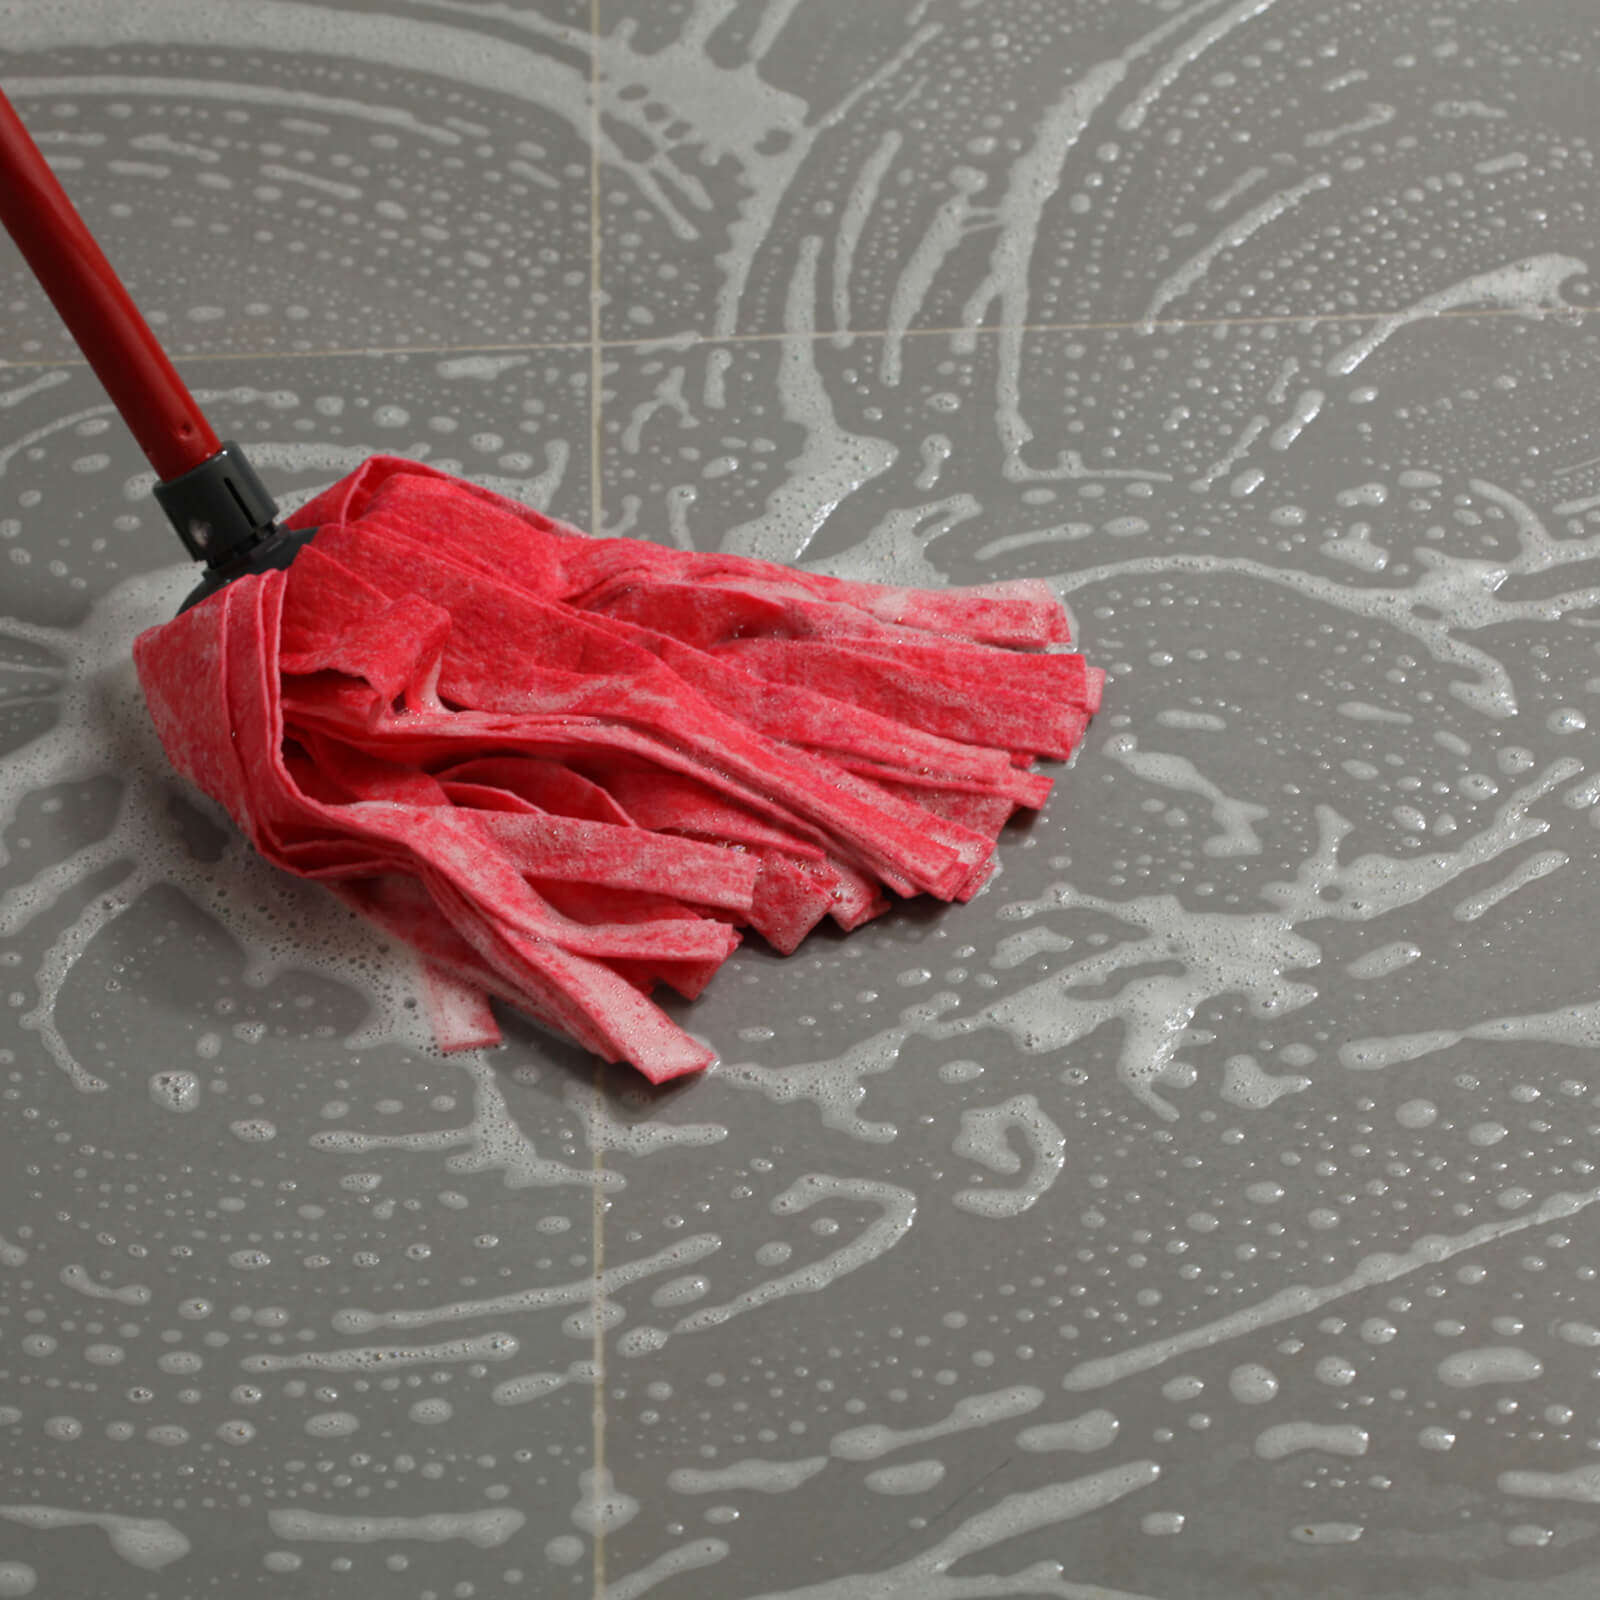 Tile cleaning | Hauptman Floor Covering Co Inc